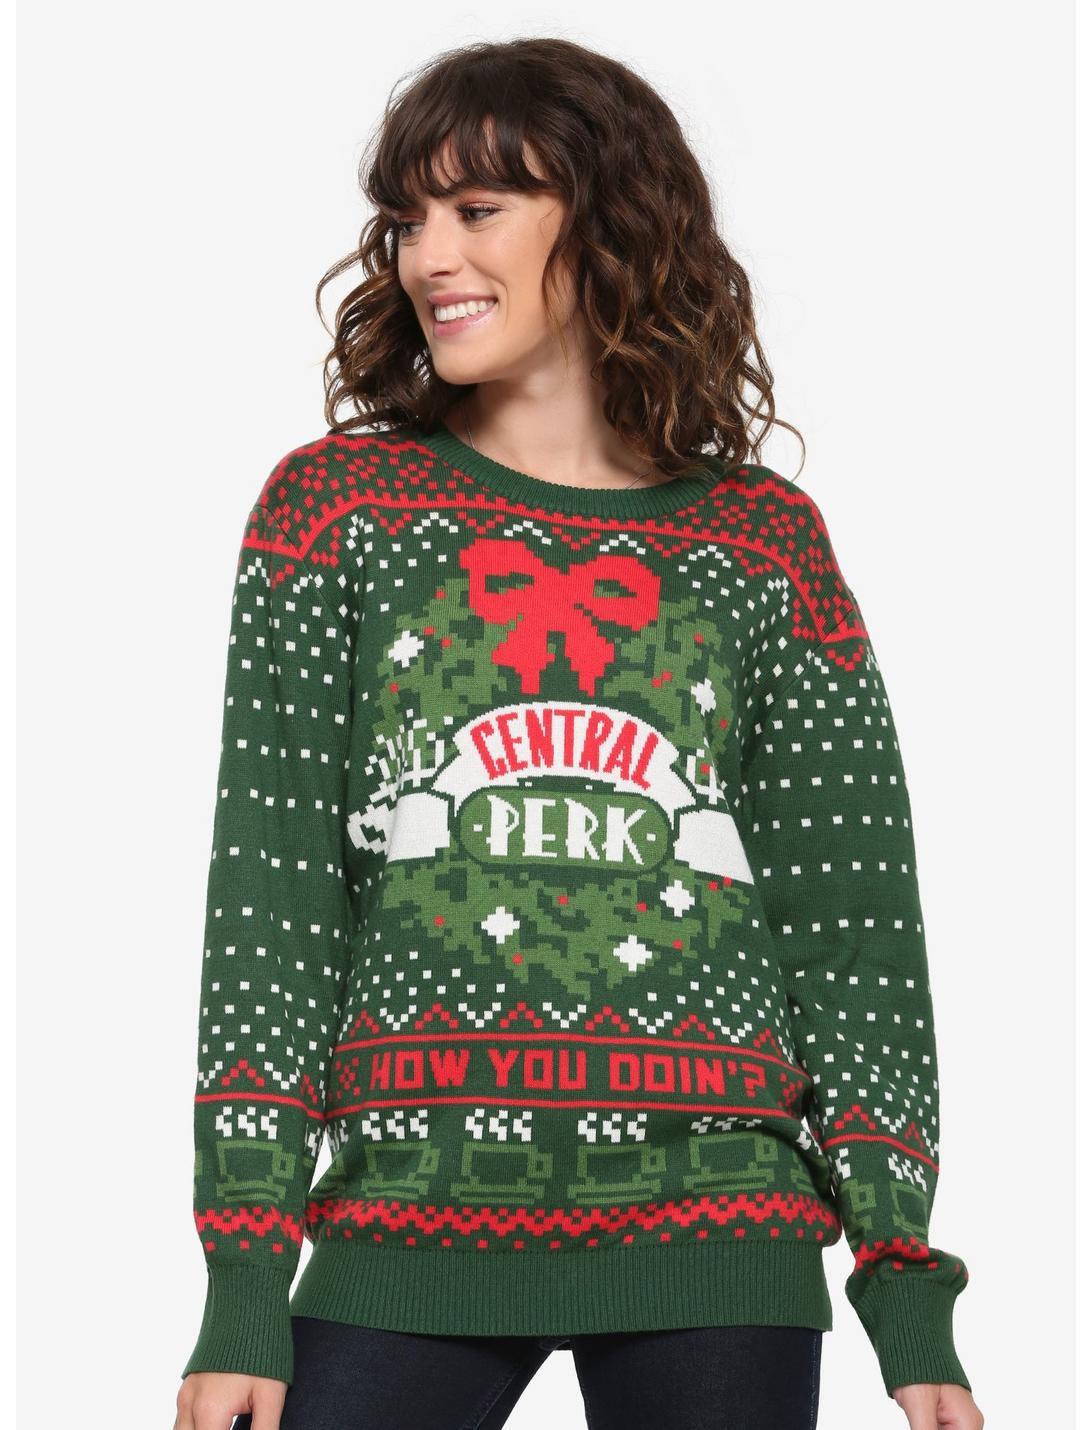 Friends Central Perk Ugly Holiday Sweater - BoxLunch Exclusive, GREEN, hi-res